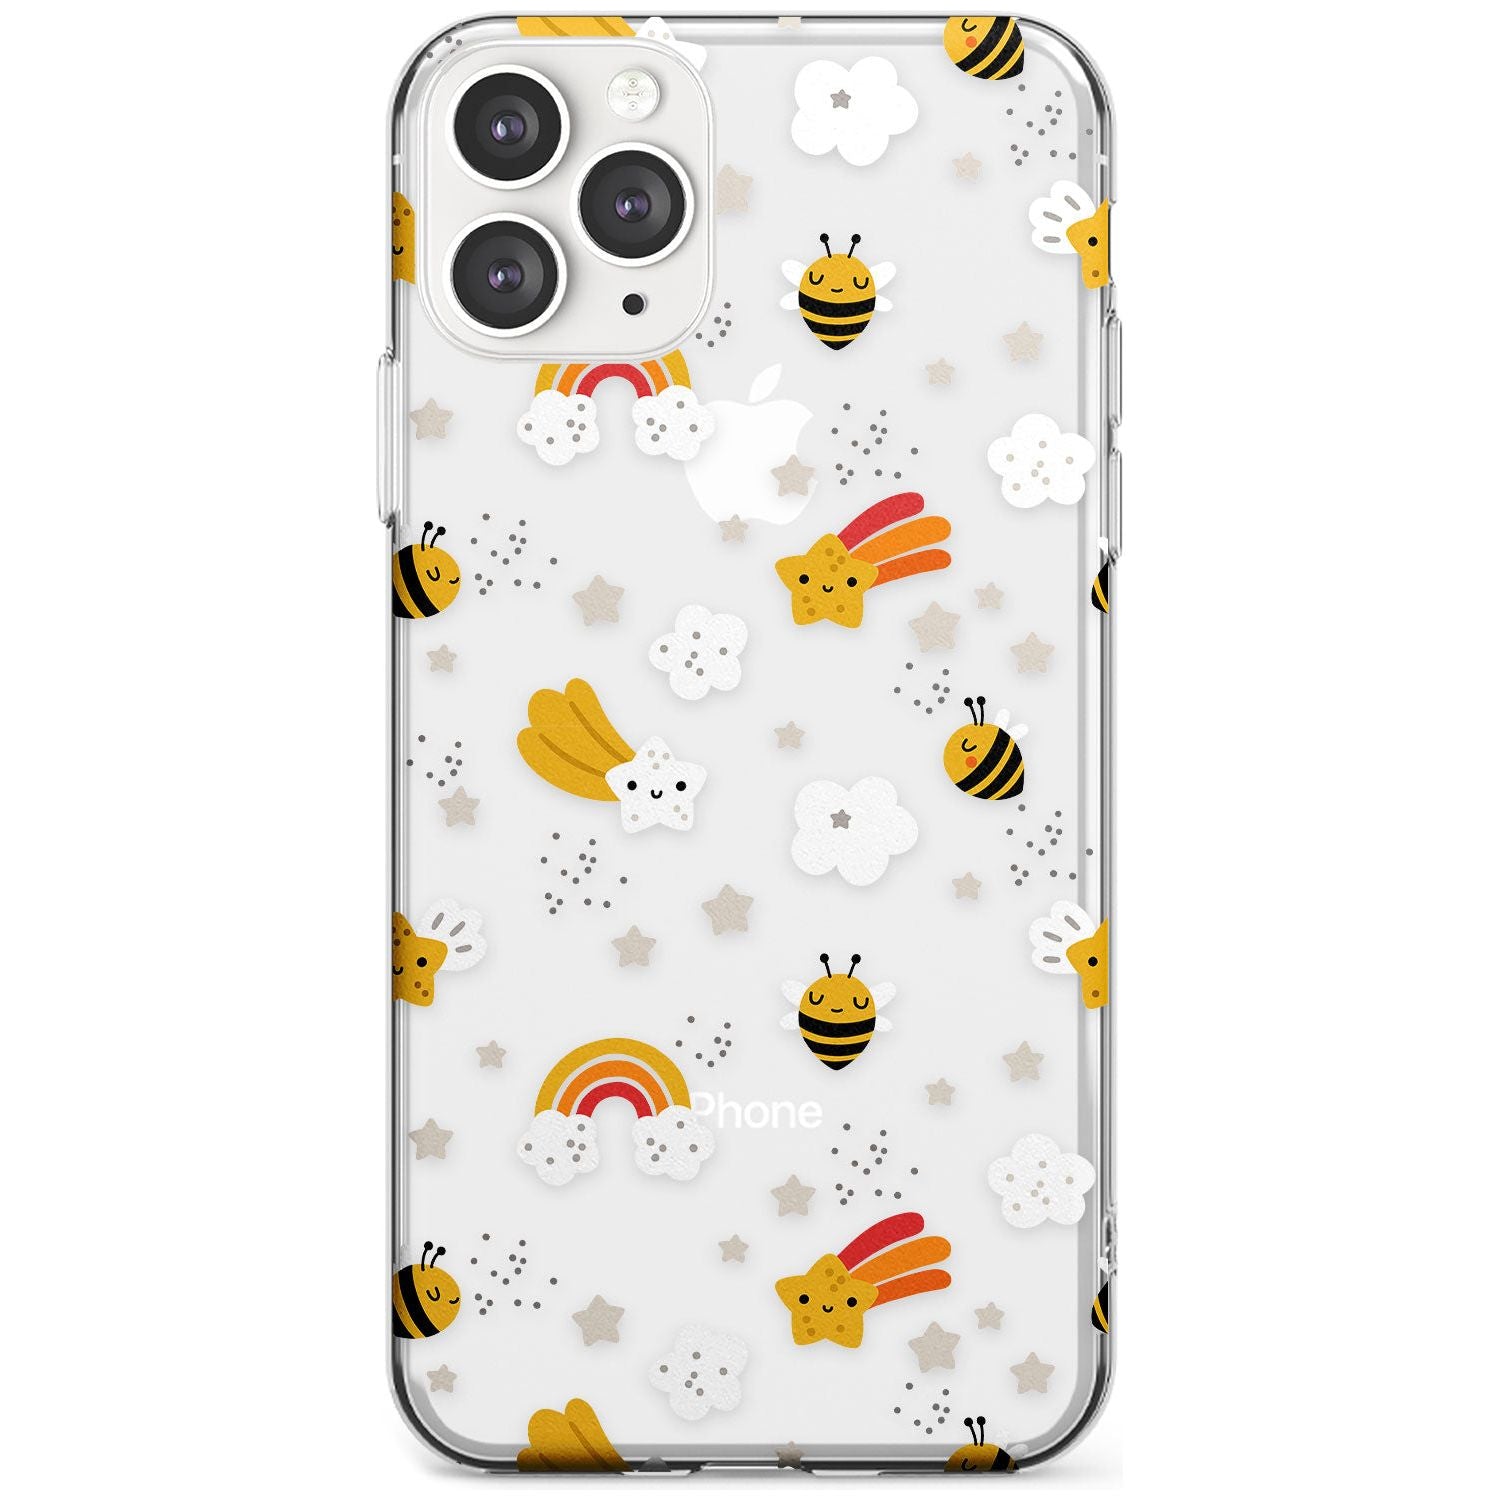 Busy Bee Slim TPU Phone Case for iPhone 11 Pro Max